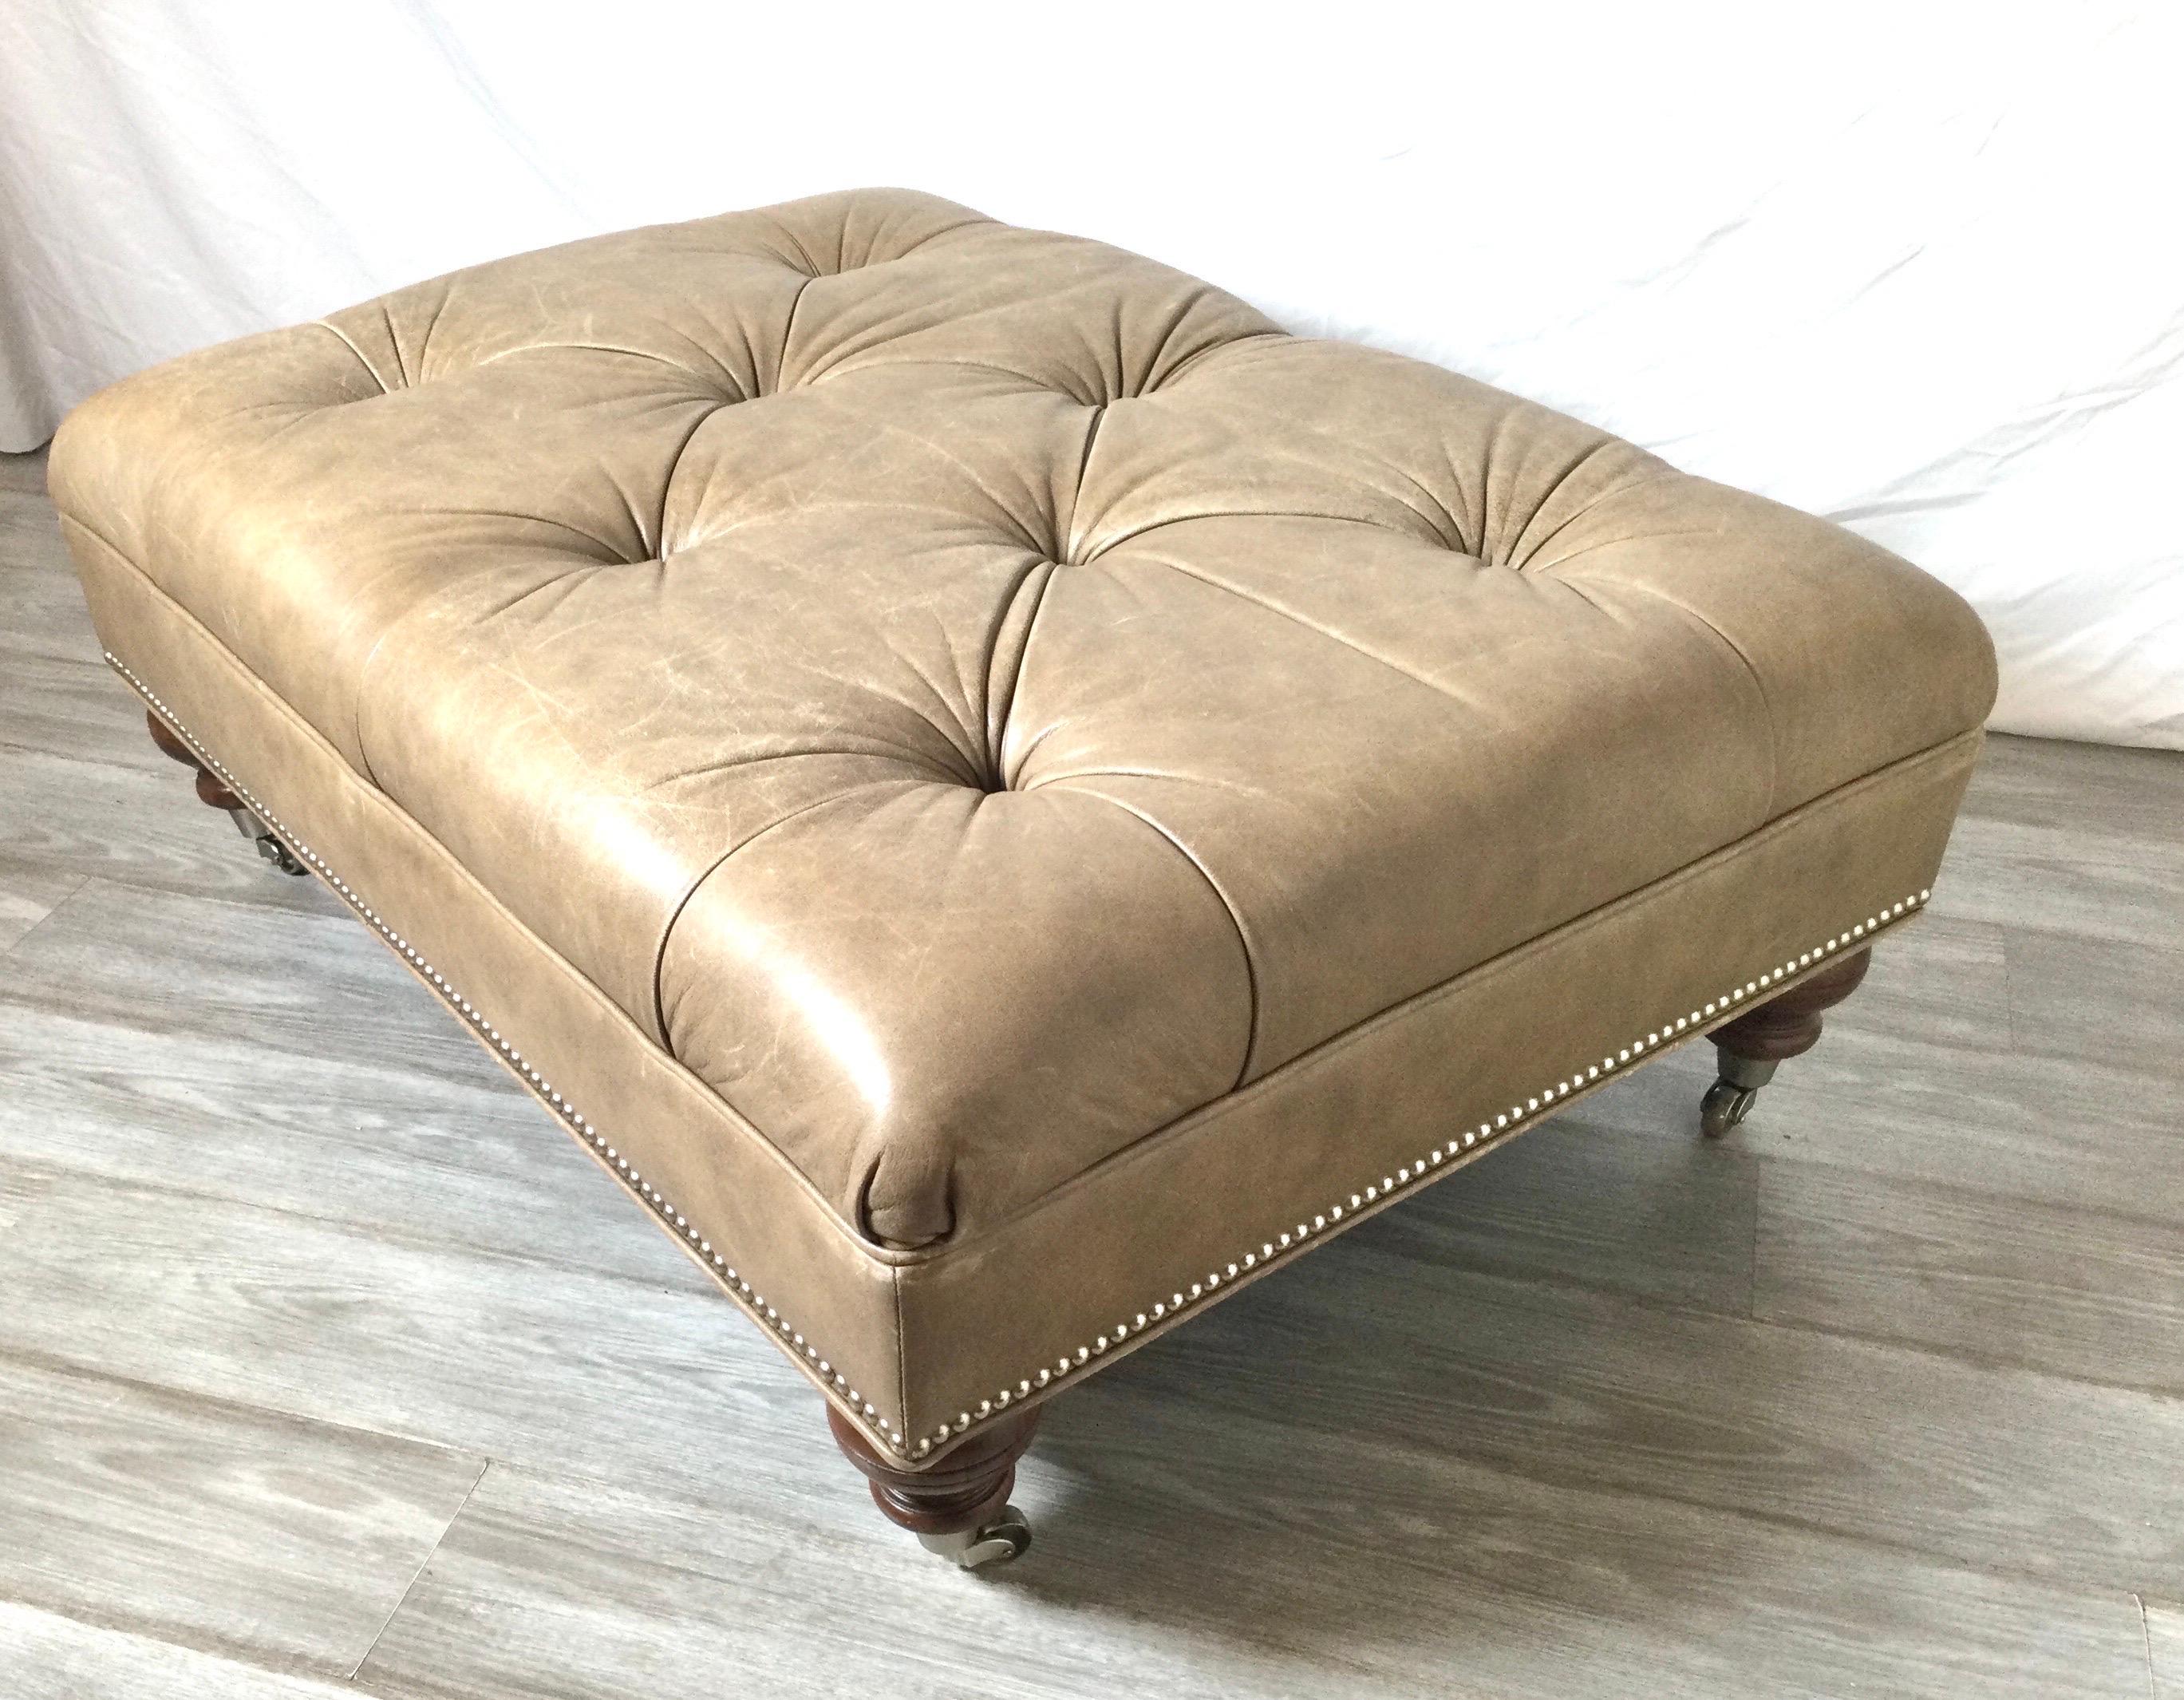 20th Century Large Tufted Leather Ottoman Coffee Table